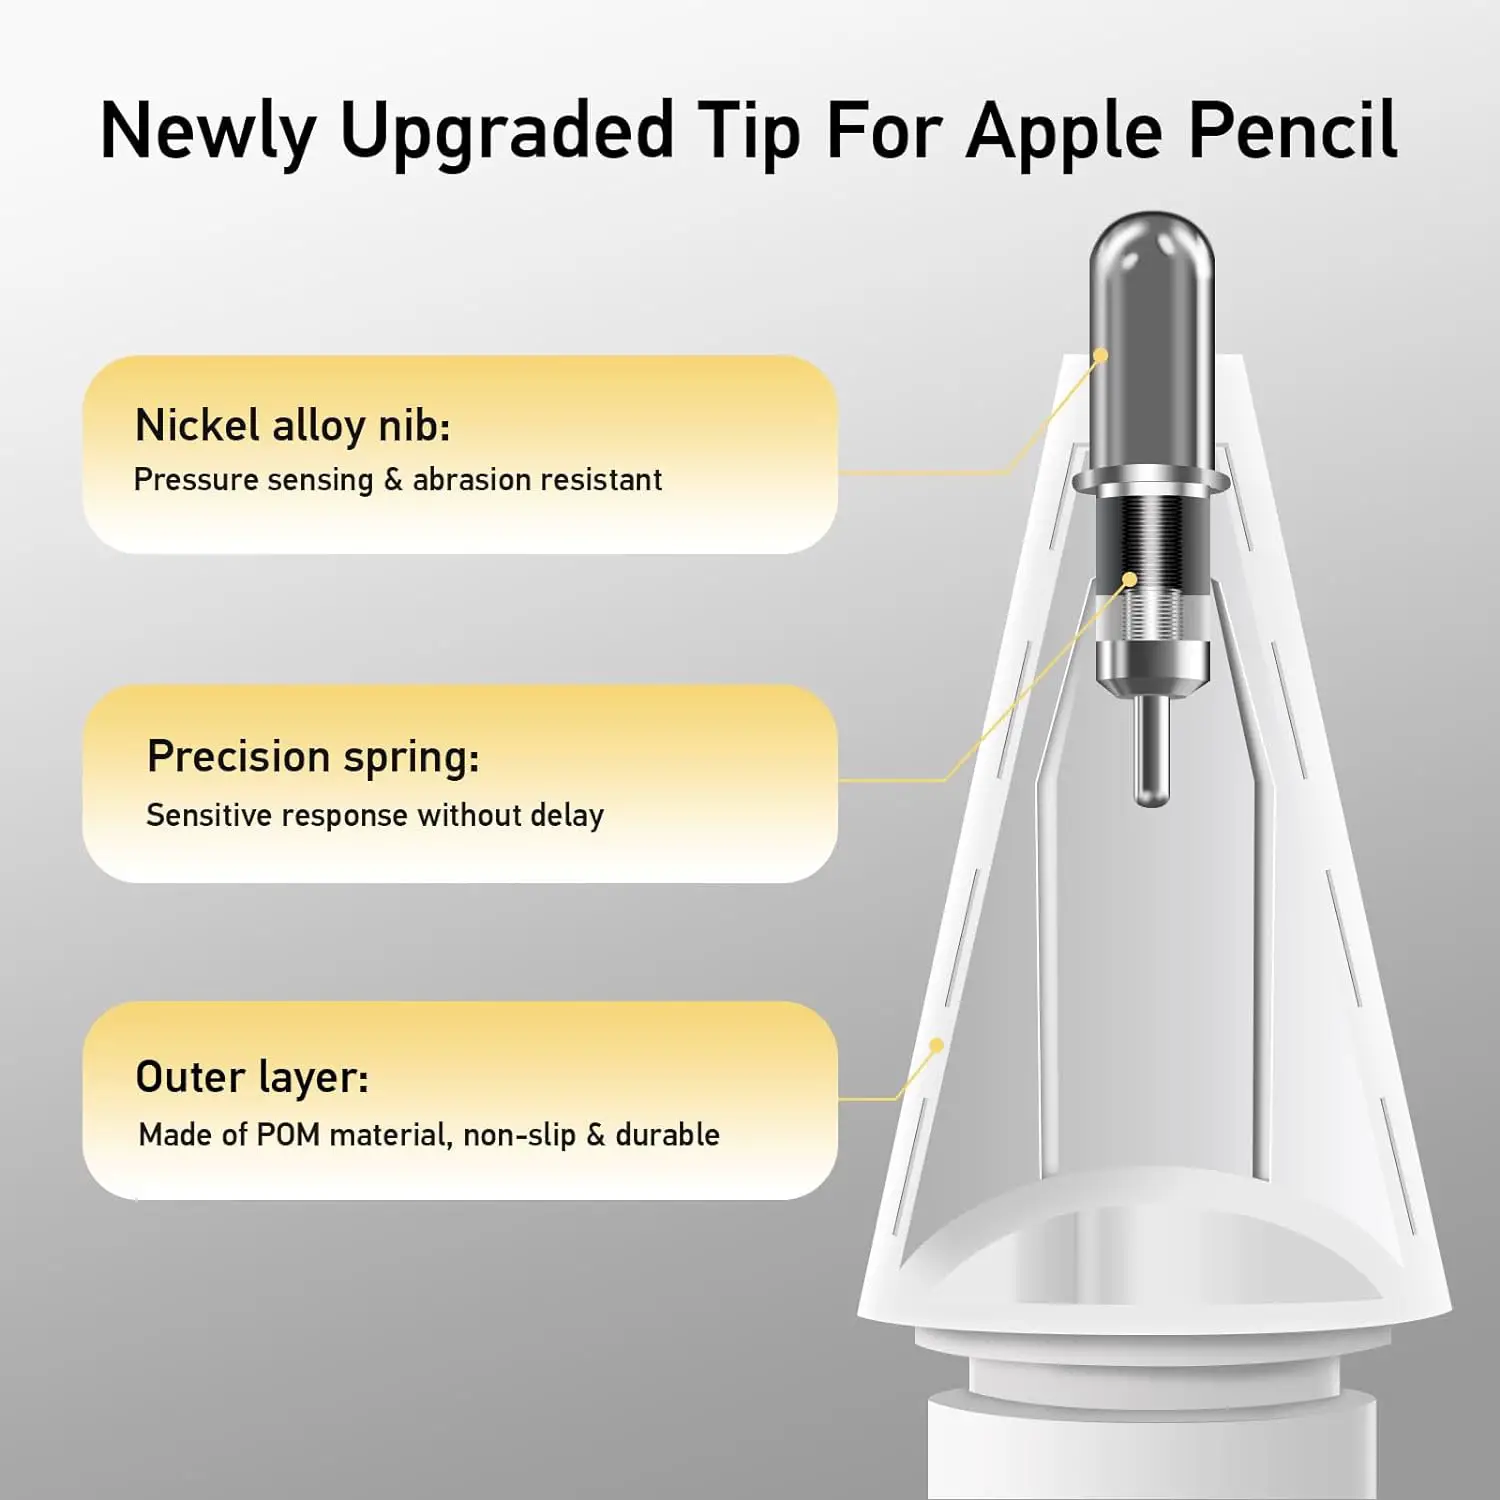 Replacement Tips for Apple Pencil 1st/2nd Gen, StylusHome Upgraded Fine Point Apple Pencil Tips, No Wear Out Precise Control Pen Like Nibs for iPad Pro/Air/Mini Pencil- (2 Pack)